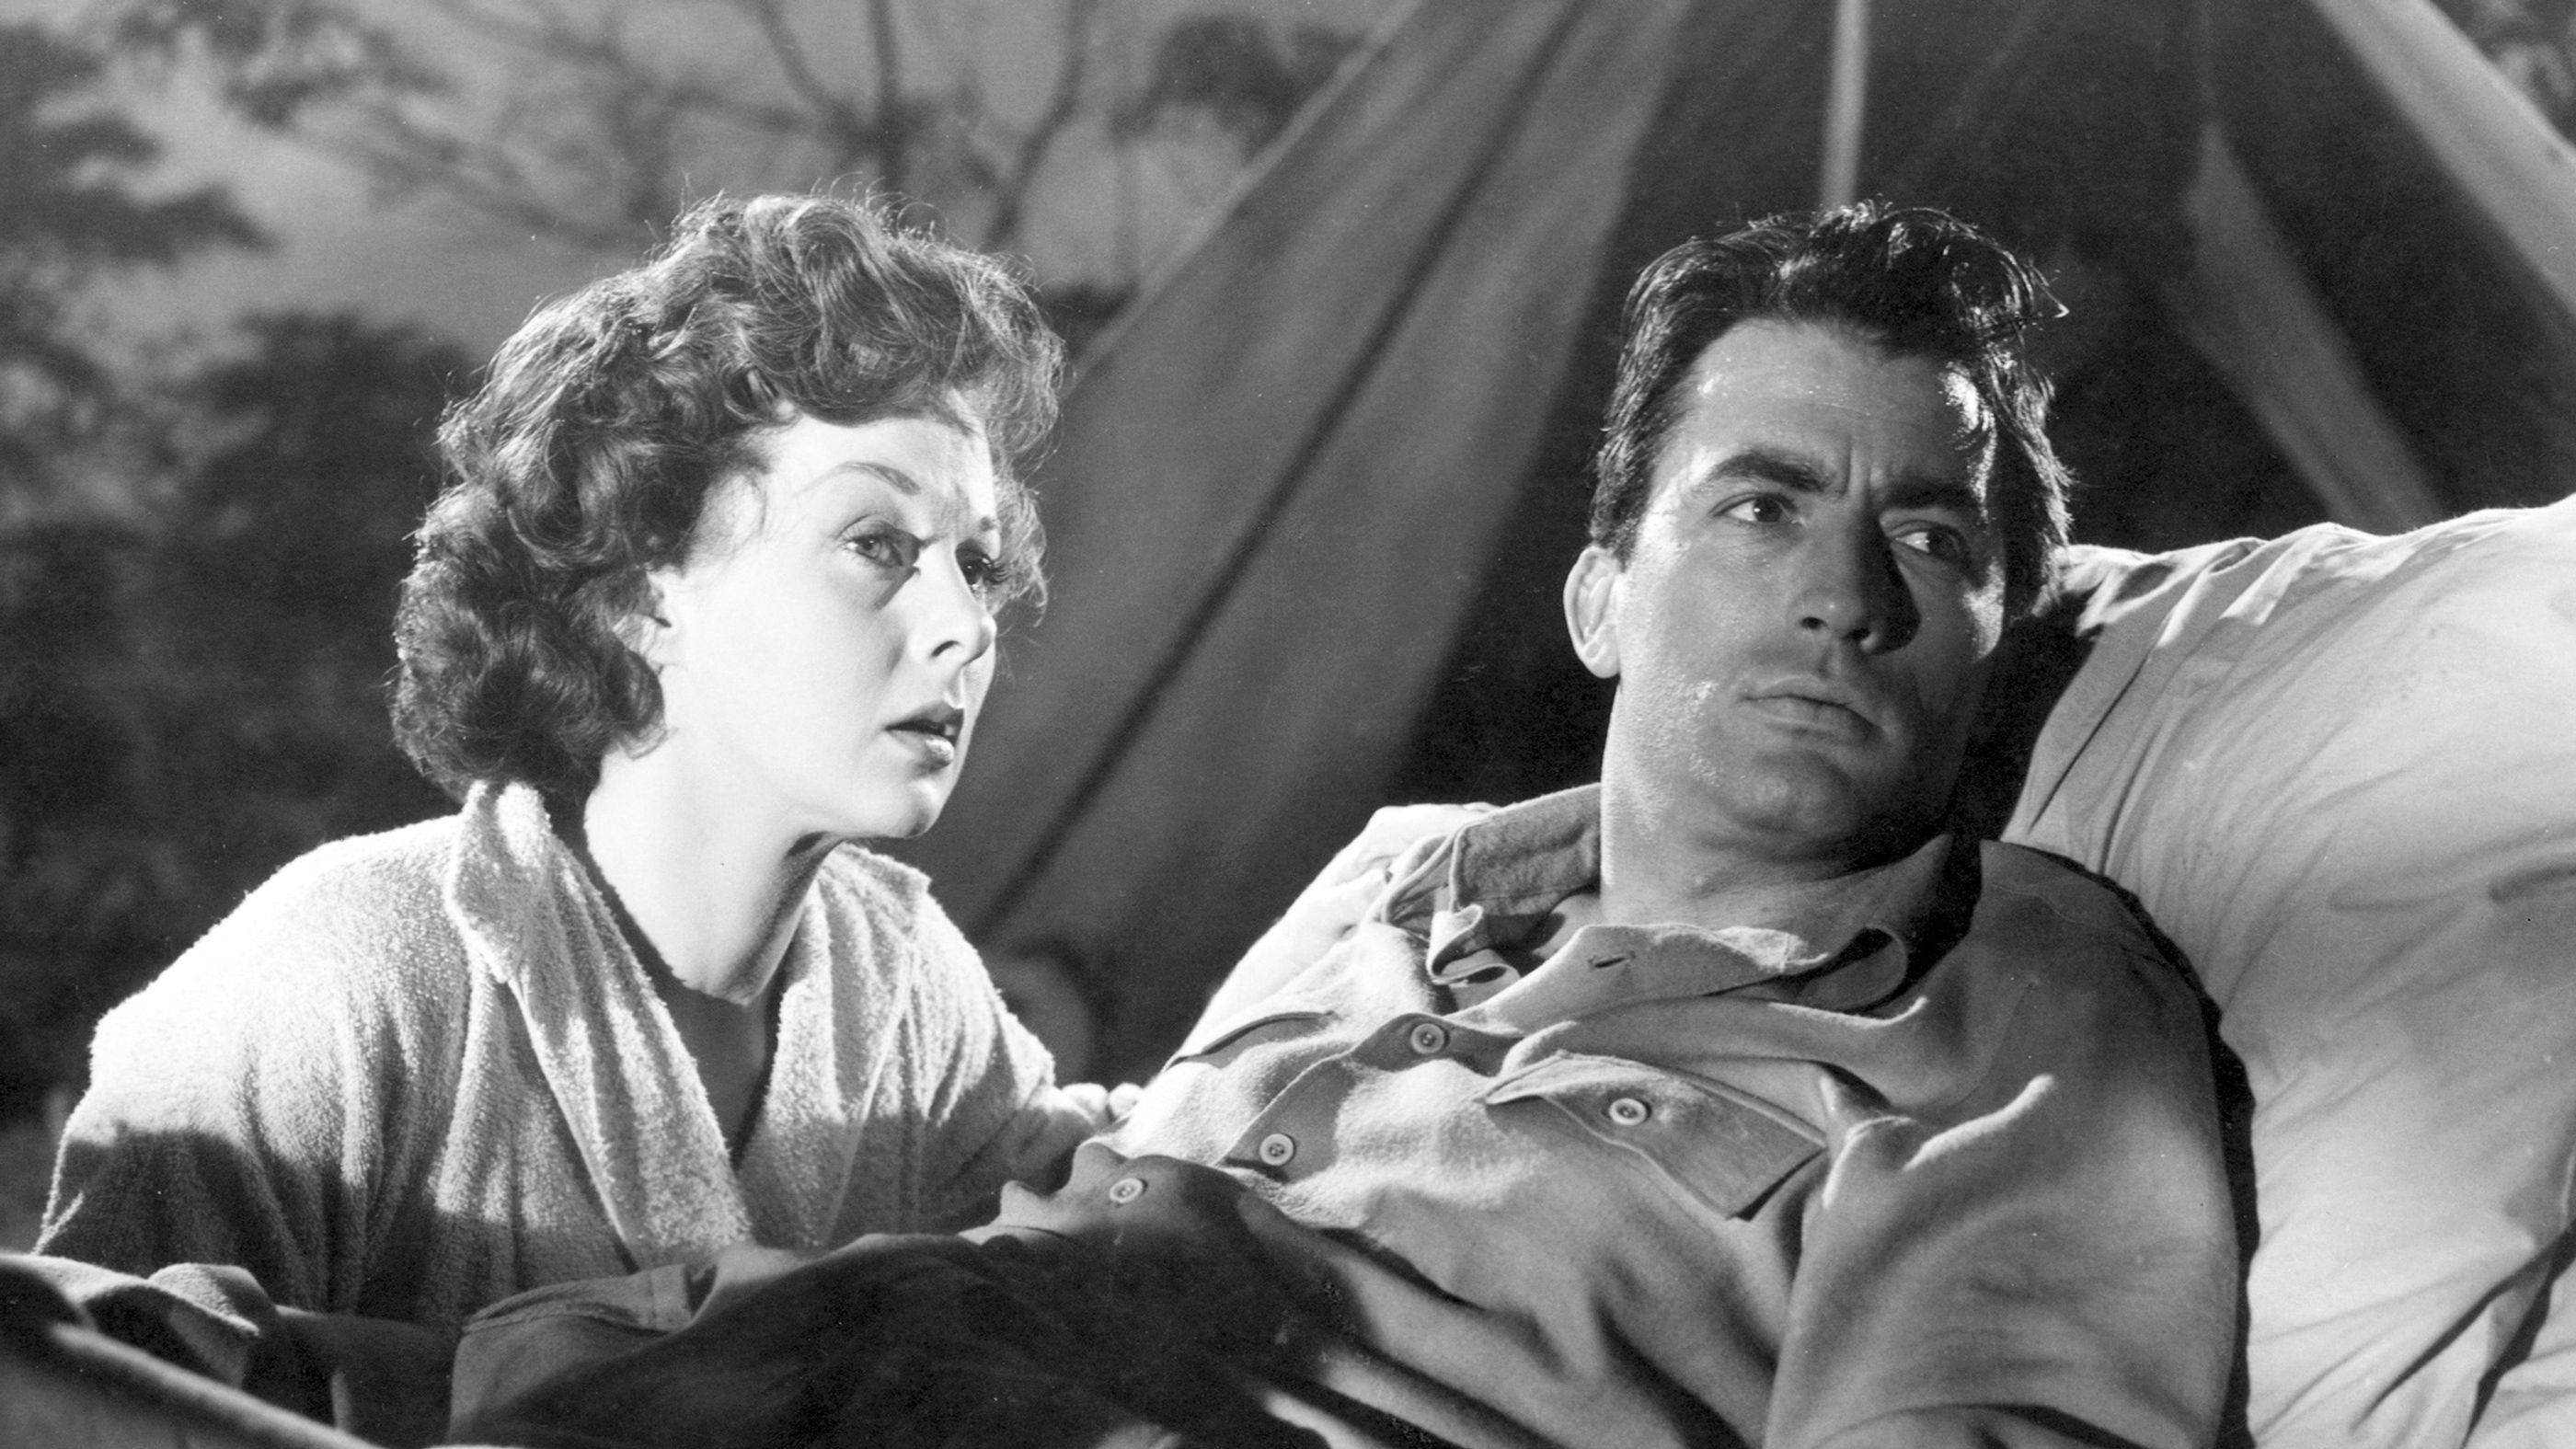 10 Most Iconic Old Movies: The Snows Of Kilimanjaro